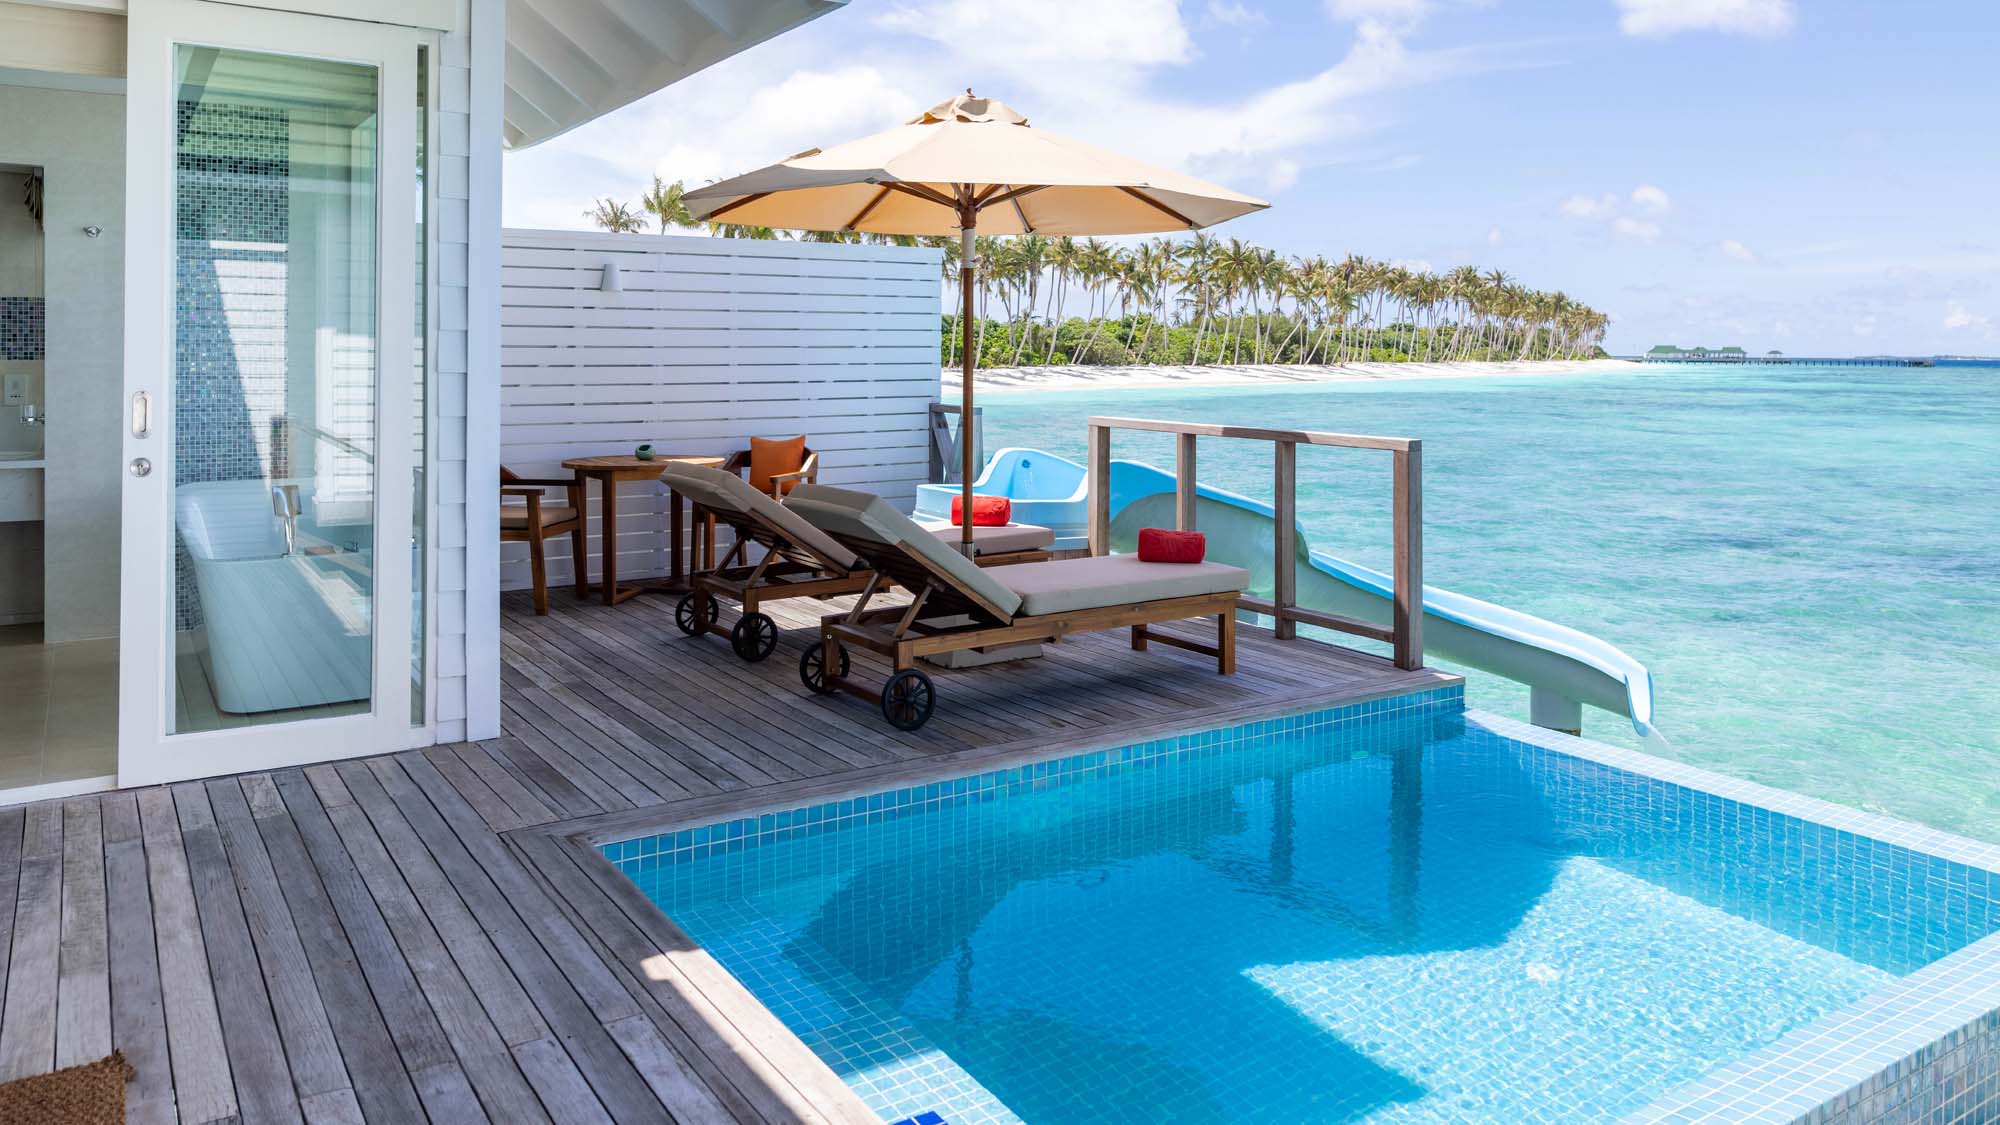 the Maldives holiday offer